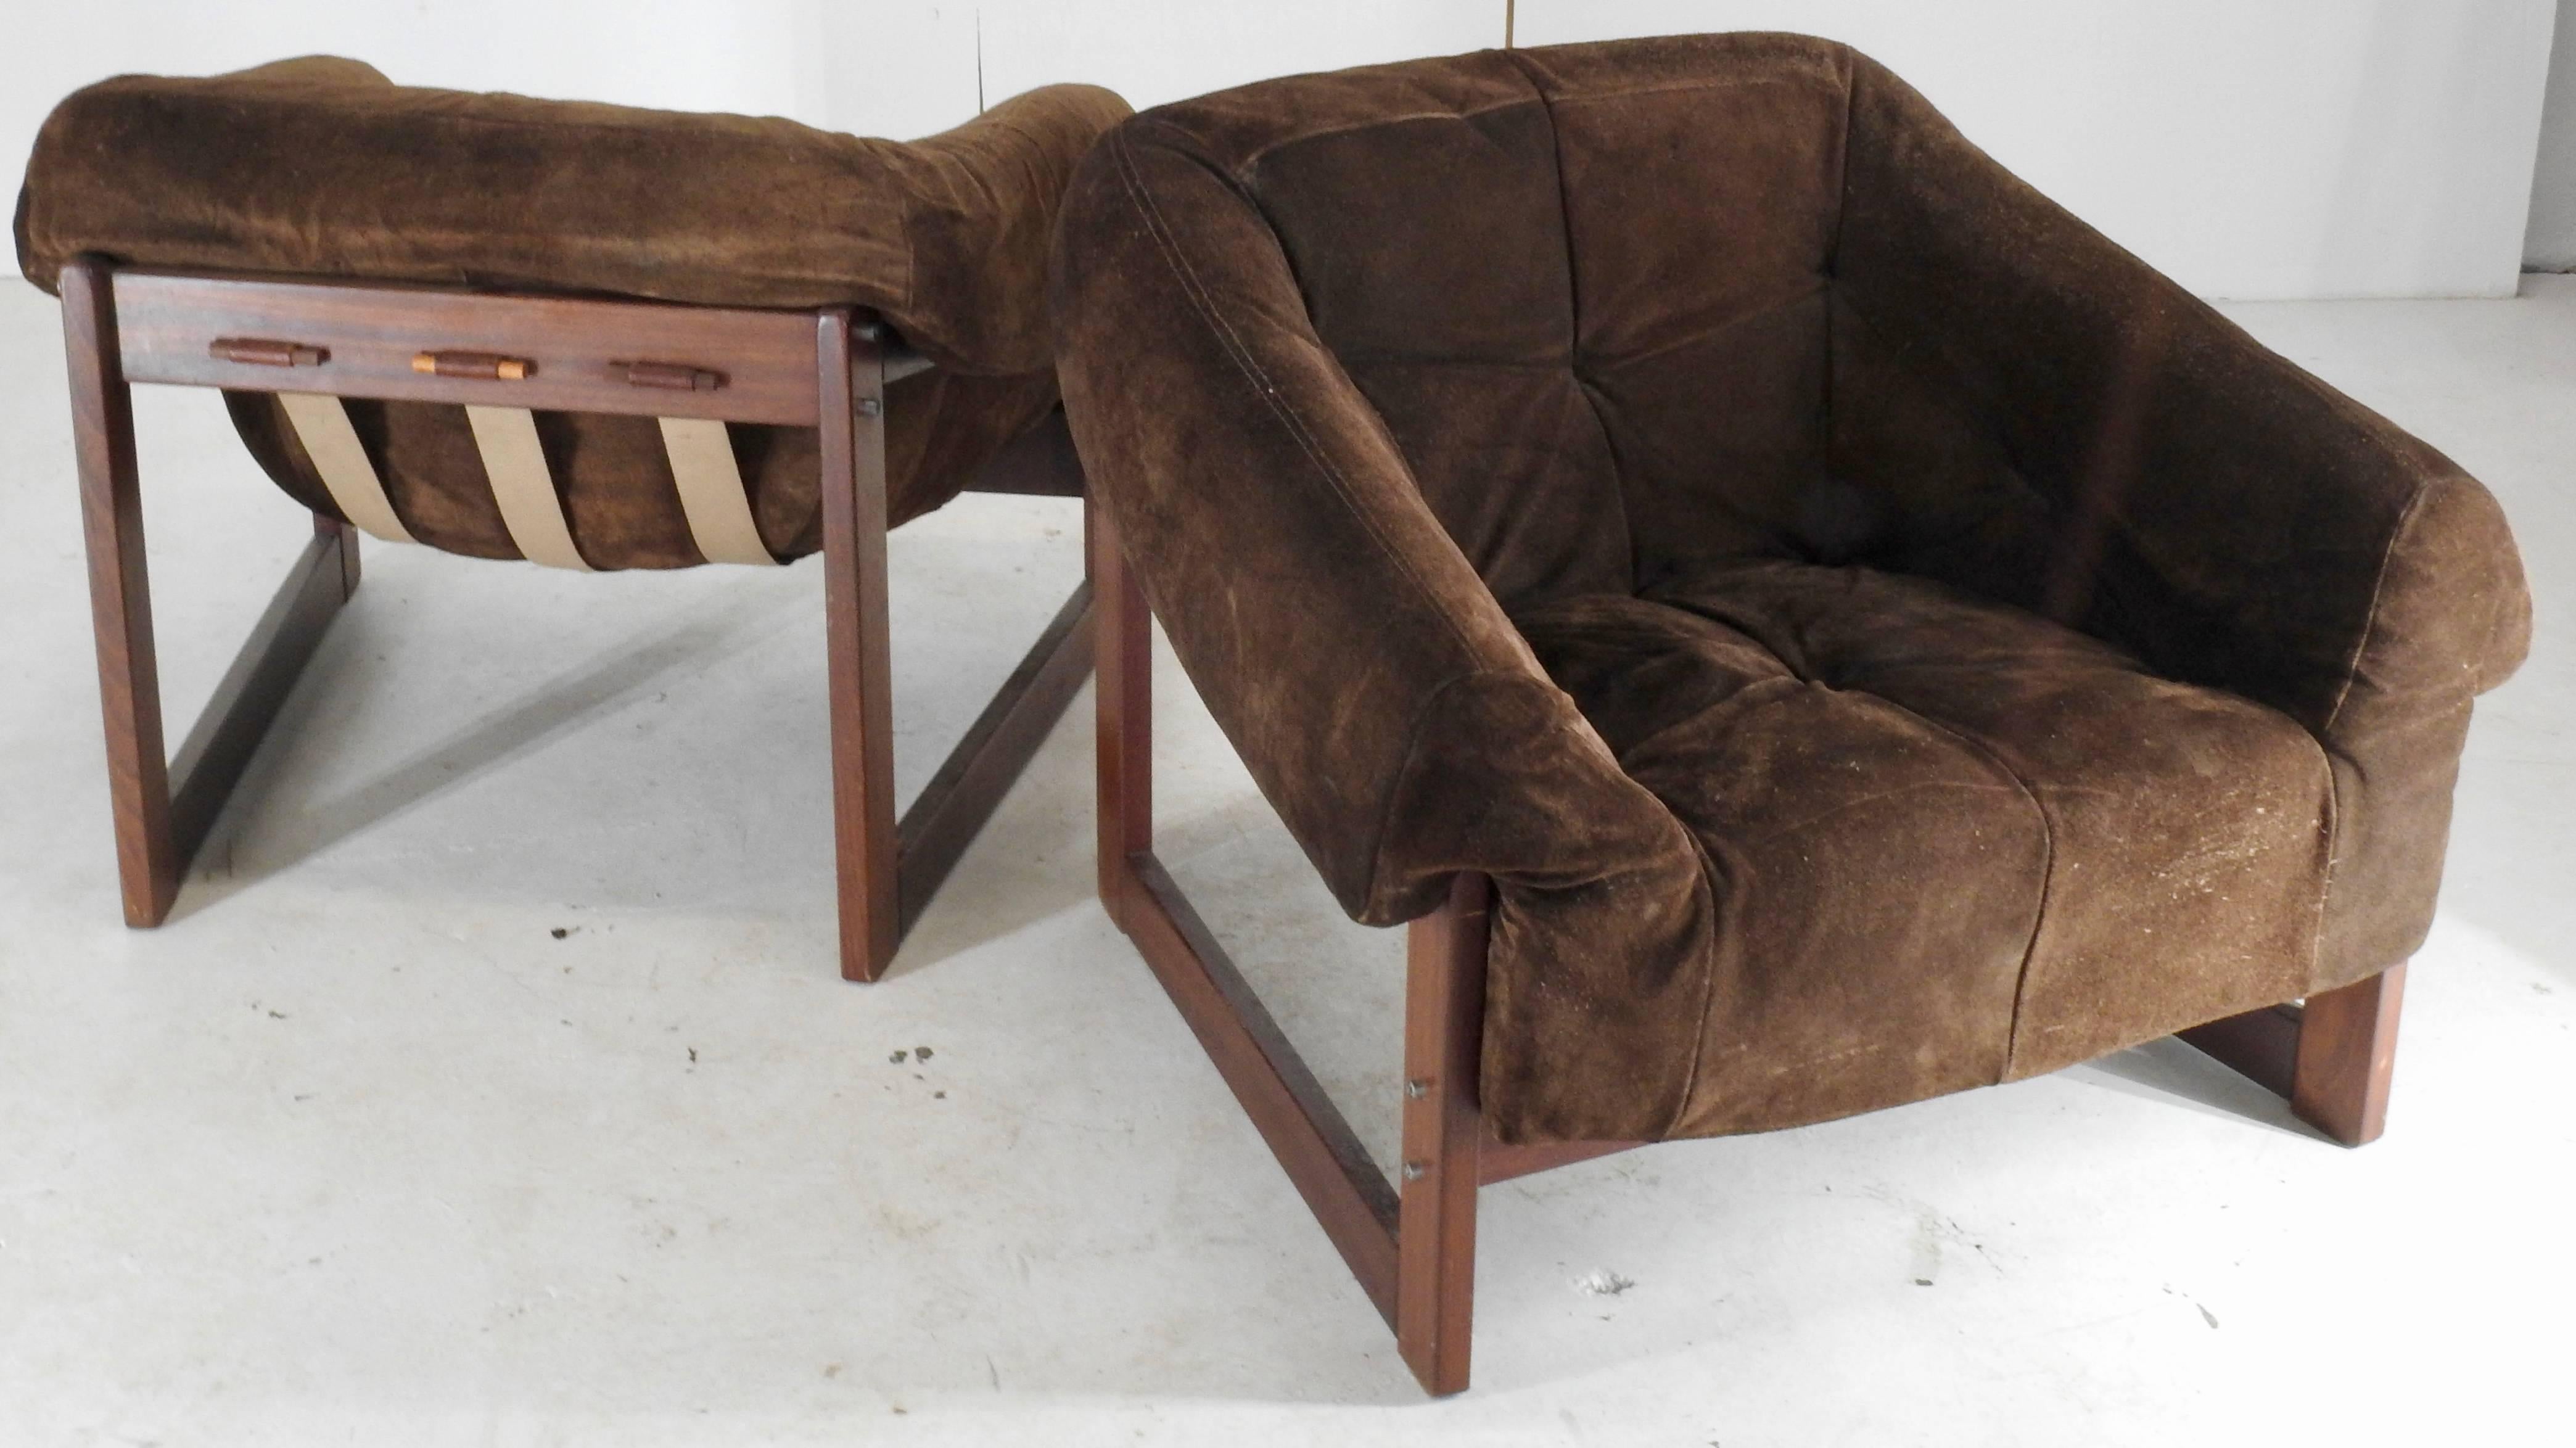 Rosewood frames with leather straps are topped with brown suede leather cushion to make up this set of two Lafer lounge chairs. They are by Brazilian Percival Lafer in the Mid-Century Modern style. The formed cushions are removable. The rosewood